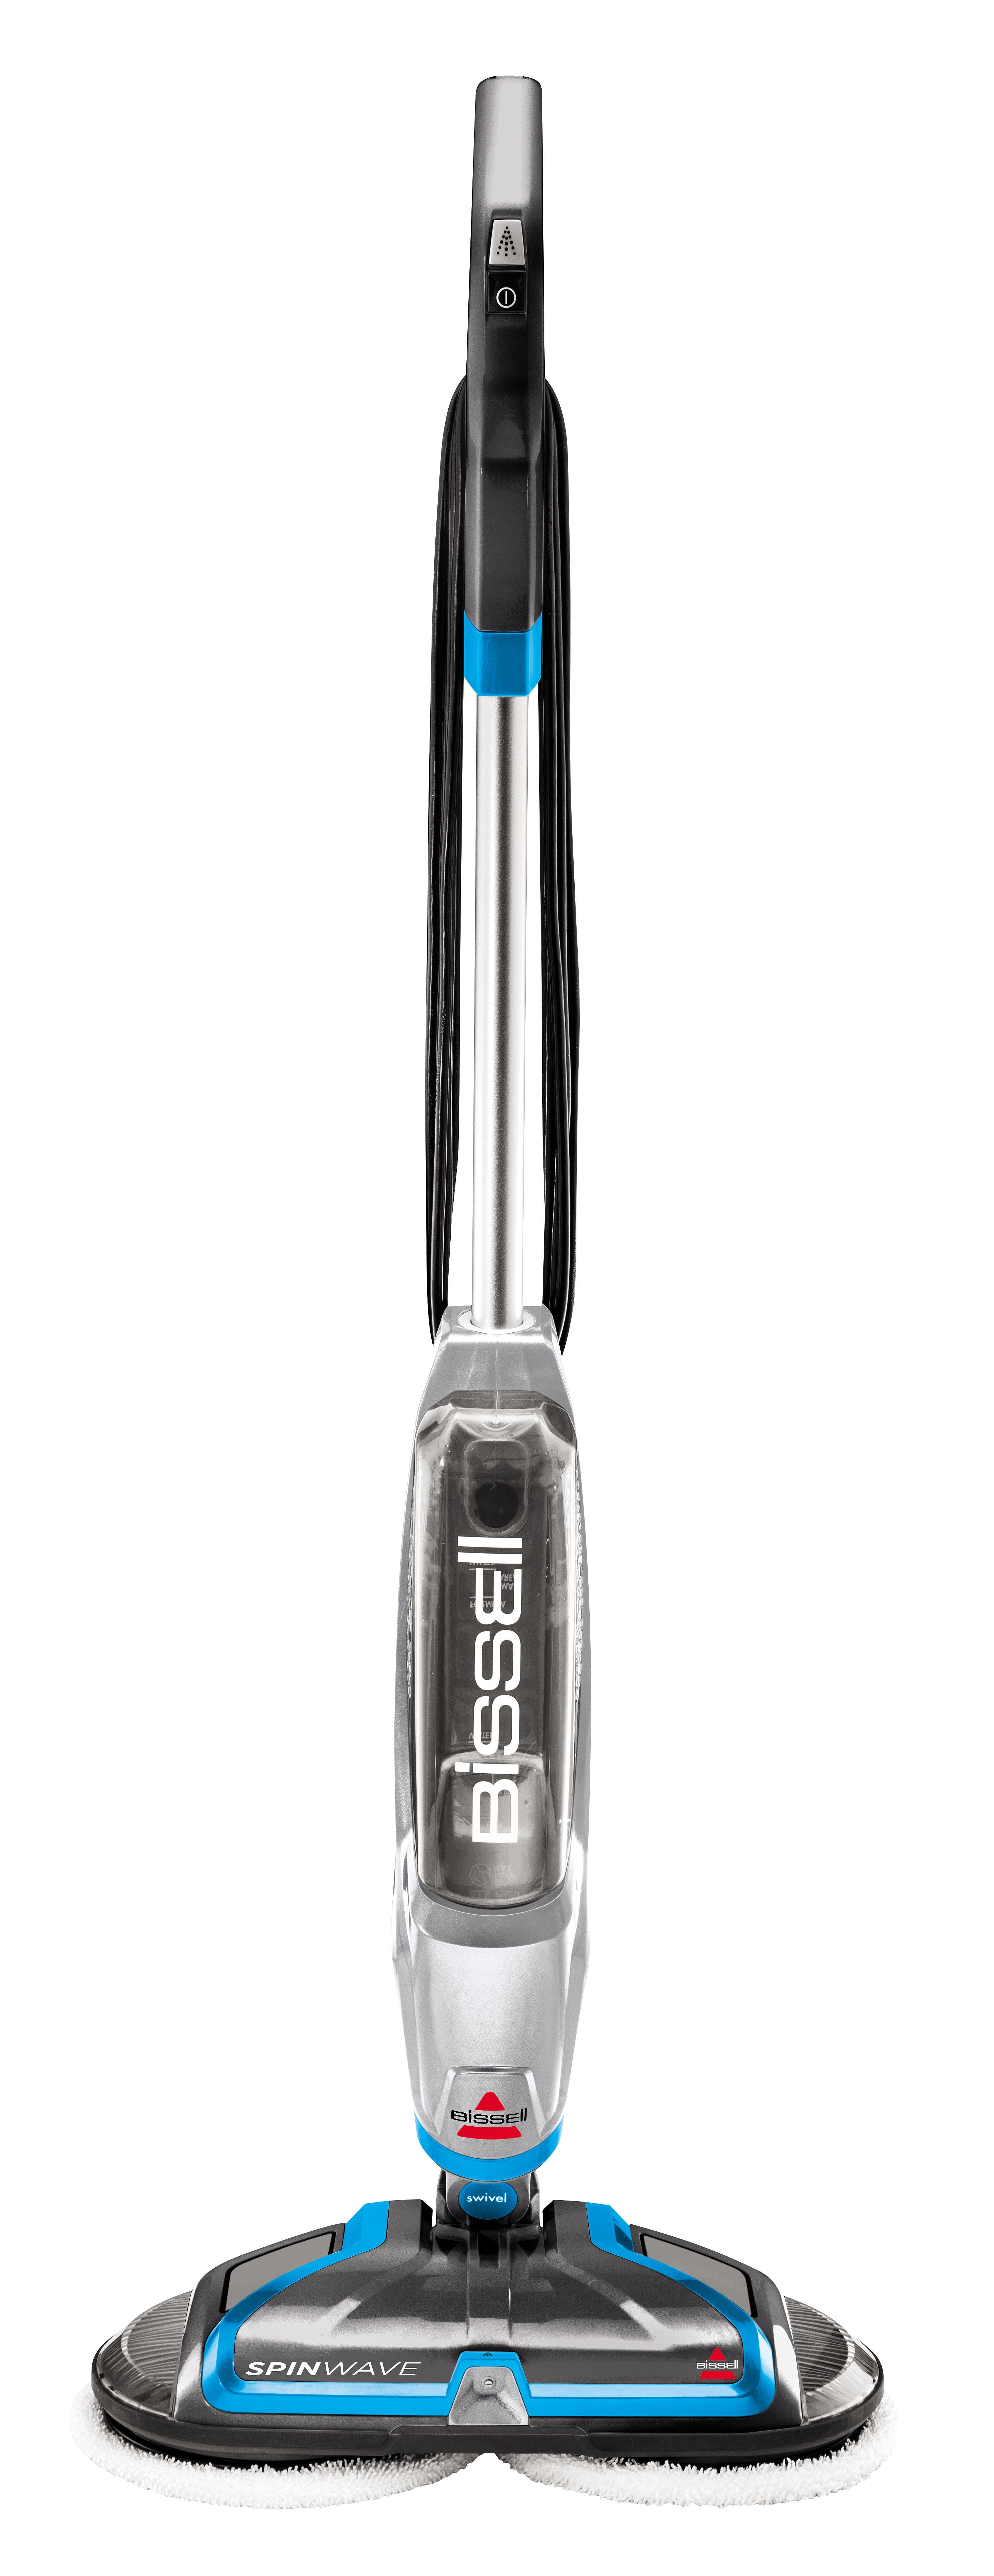 BISSELL® SpinWave® Hard Floor Spin Mop 2039A